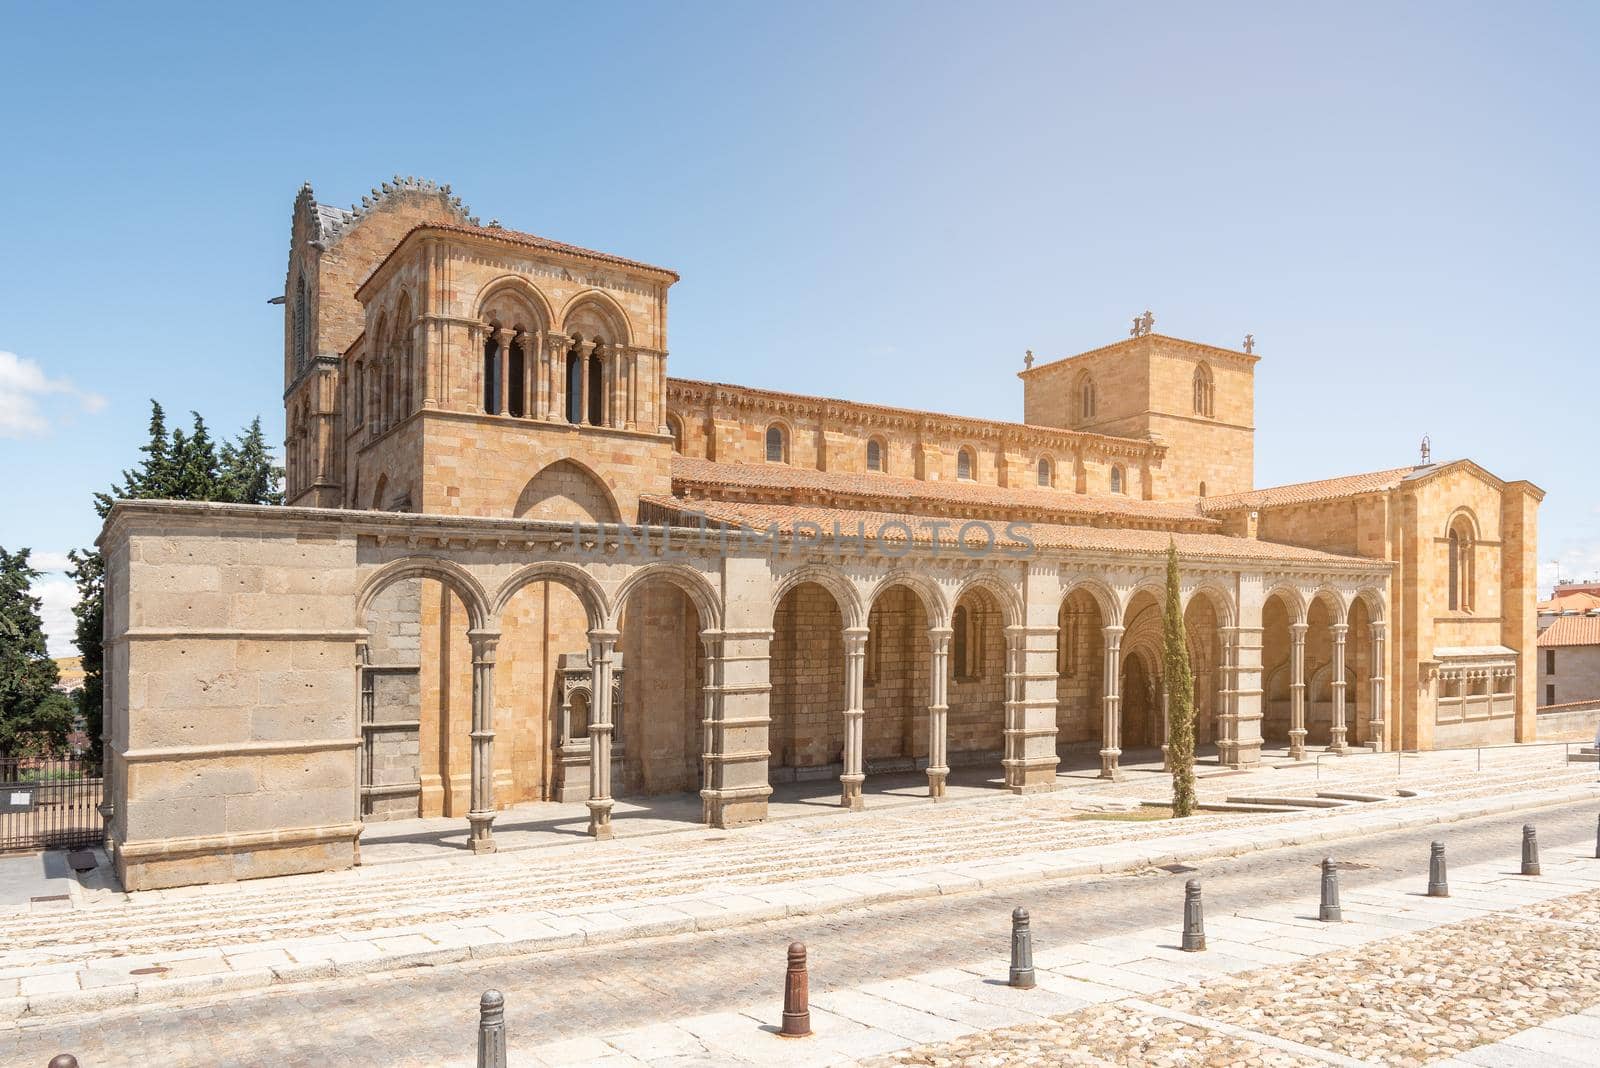 Amazing scenery of Basilica of San Vicente with arched passages and windows located in Avila city on sunny day under blue sky